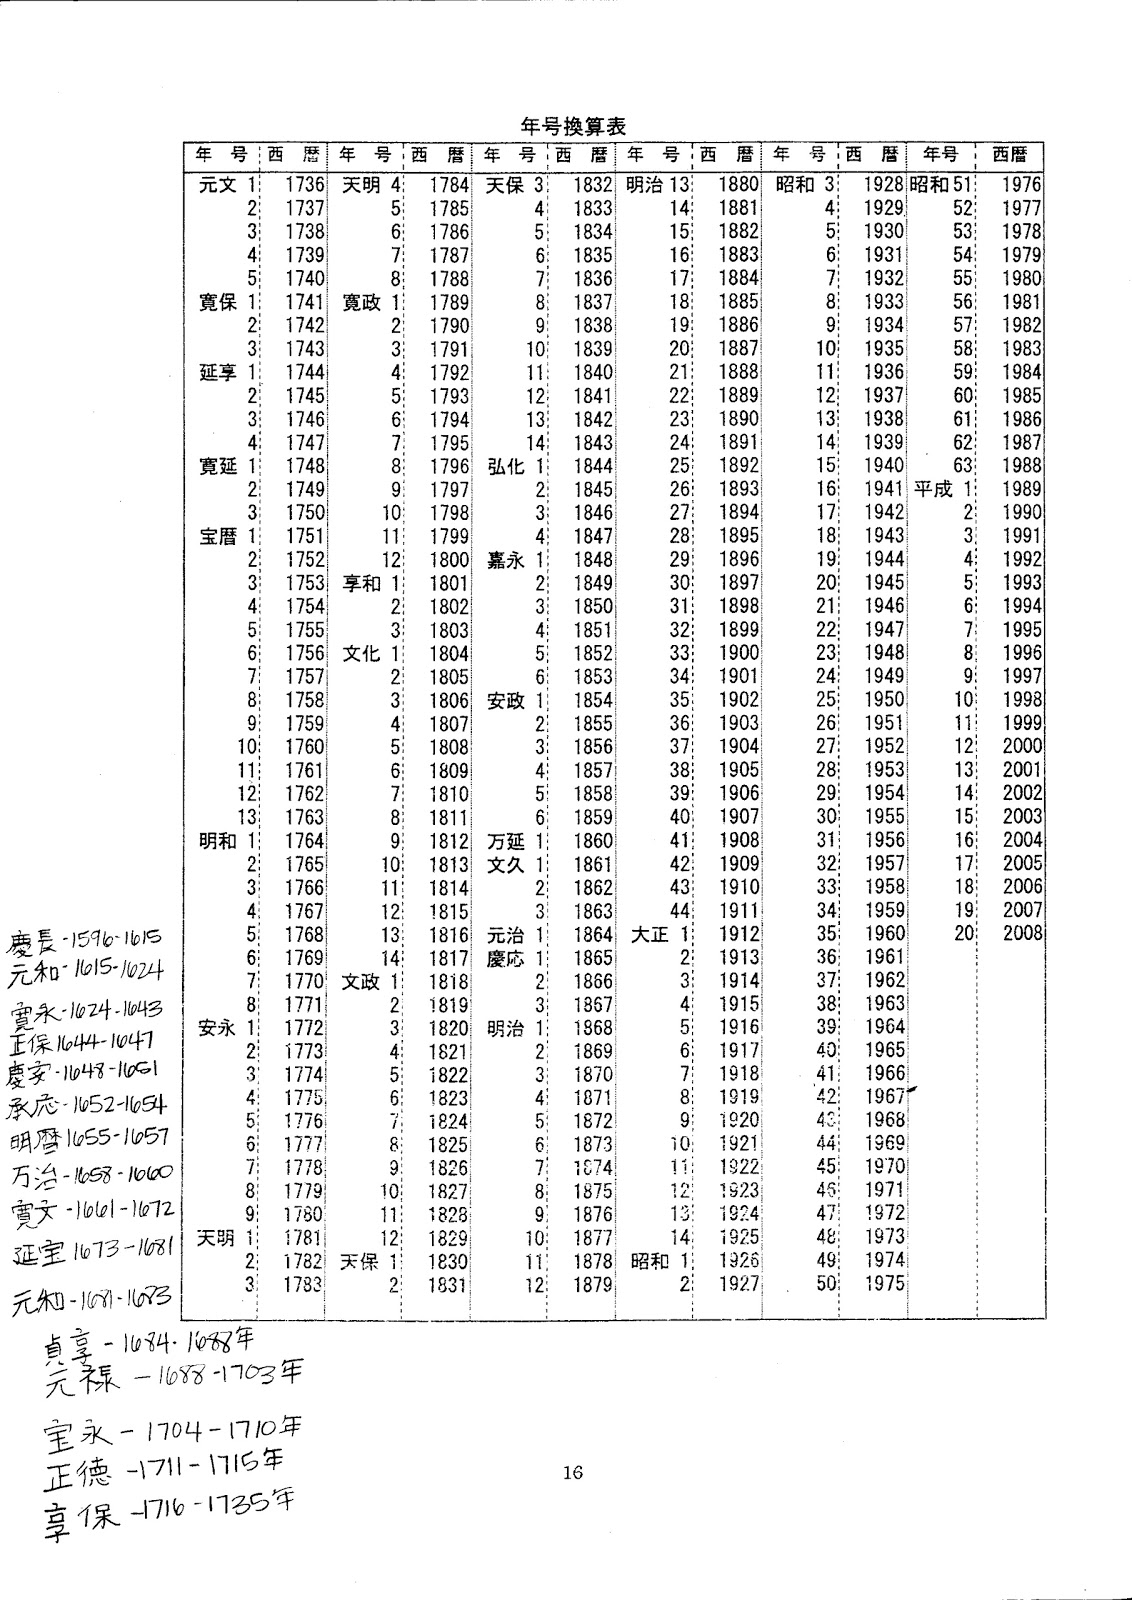 my-japanese-family-search-dates-and-numbers-conversion-charts